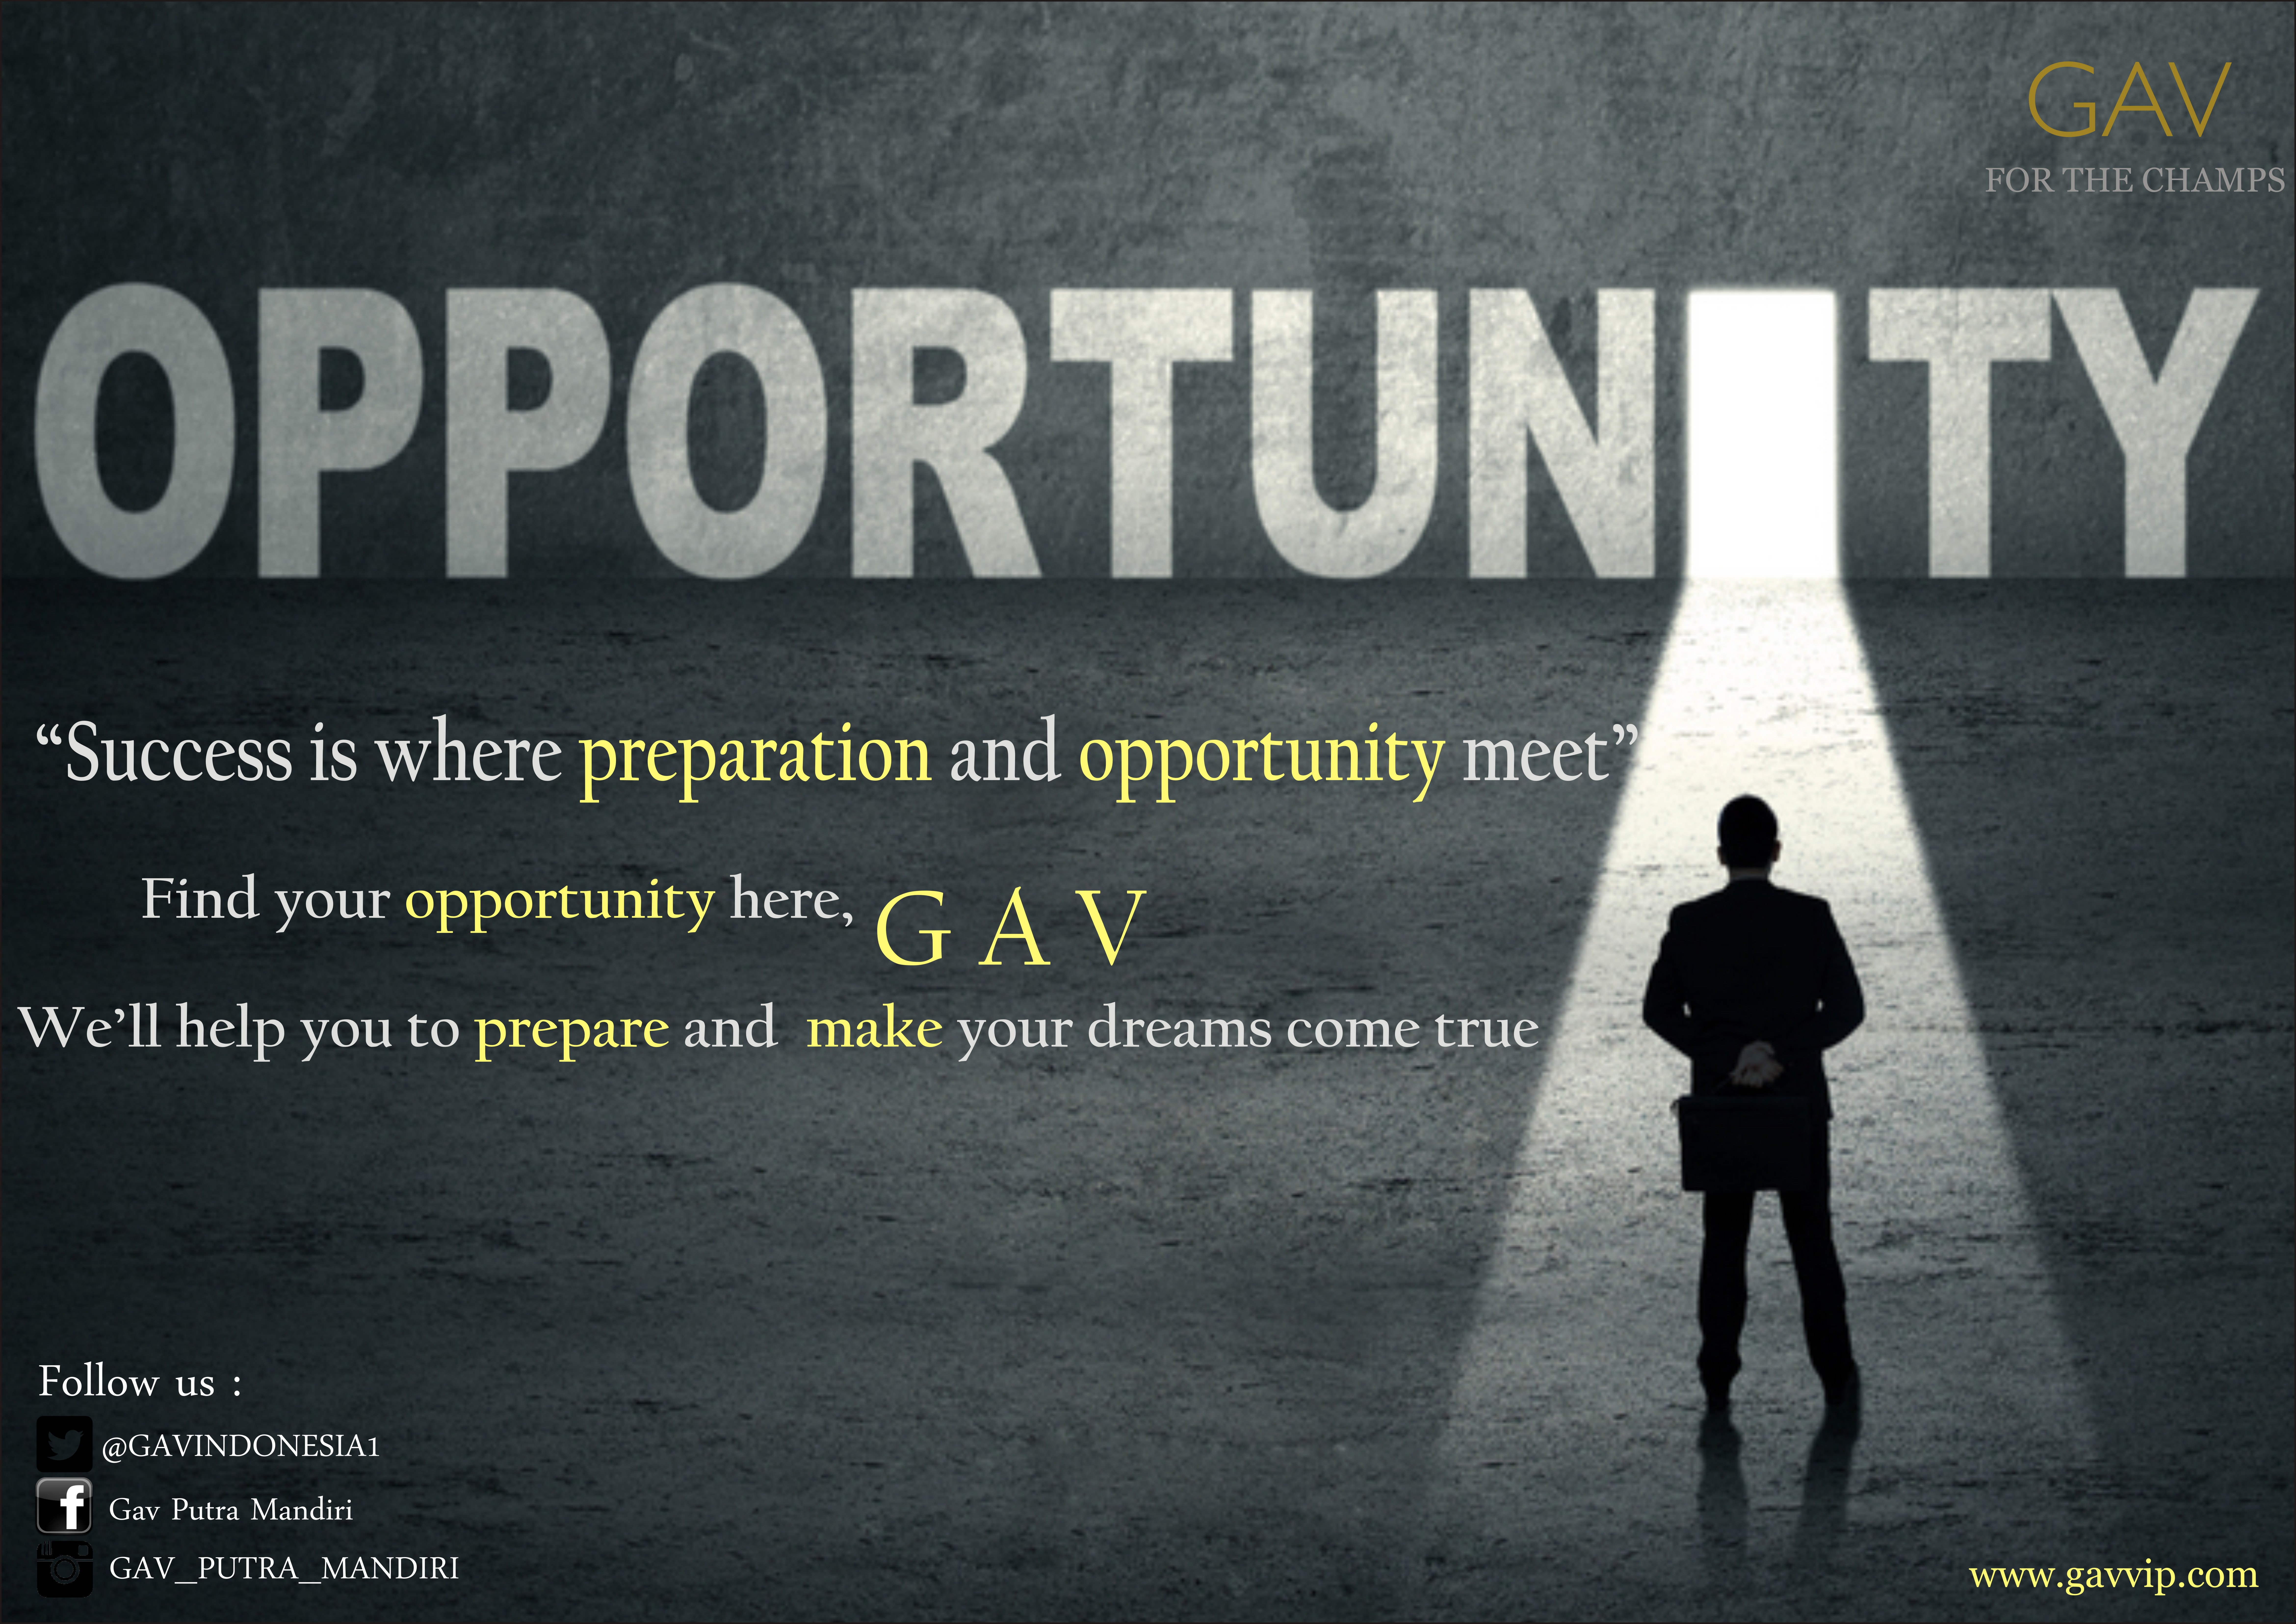 Experience name. Opportunities. Opportunity picture. Opportunities image. Seek дурс картинка на аву.